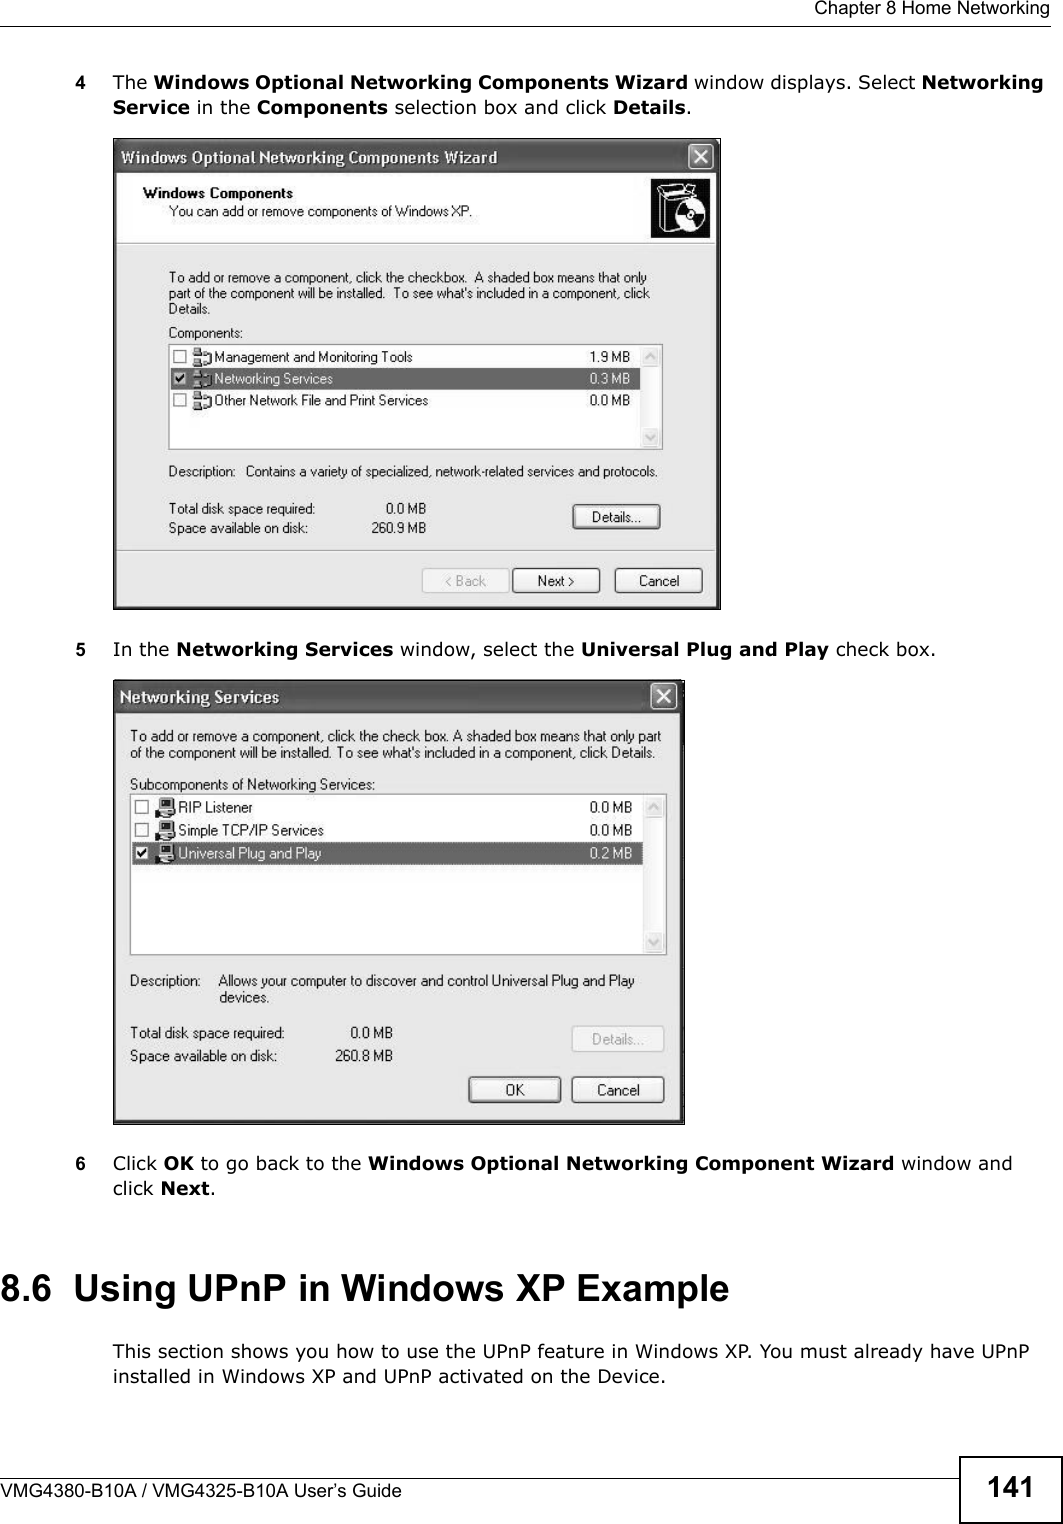 Chapter 8 Home NetworkingVMG4380-B10A / VMG4325-B10A User’s Guide 1414The Windows Optional Networking Components Wizard window displays. Select Networking Service in the Components selection box and click Details. Windows Optional Networking Co mponents Wizard5In the Networking Services window, select the Universal Plug and Play check box.Networking Services6Click OK to go back to the Windows Optional Networking Component Wizard window and click Next. 8.6  Using UPnP in Windows XP ExampleThis section shows you how to use the UPnP feature in Windows XP. You must already have UPnP installed in Windows XP and UPnP activated on the Device.